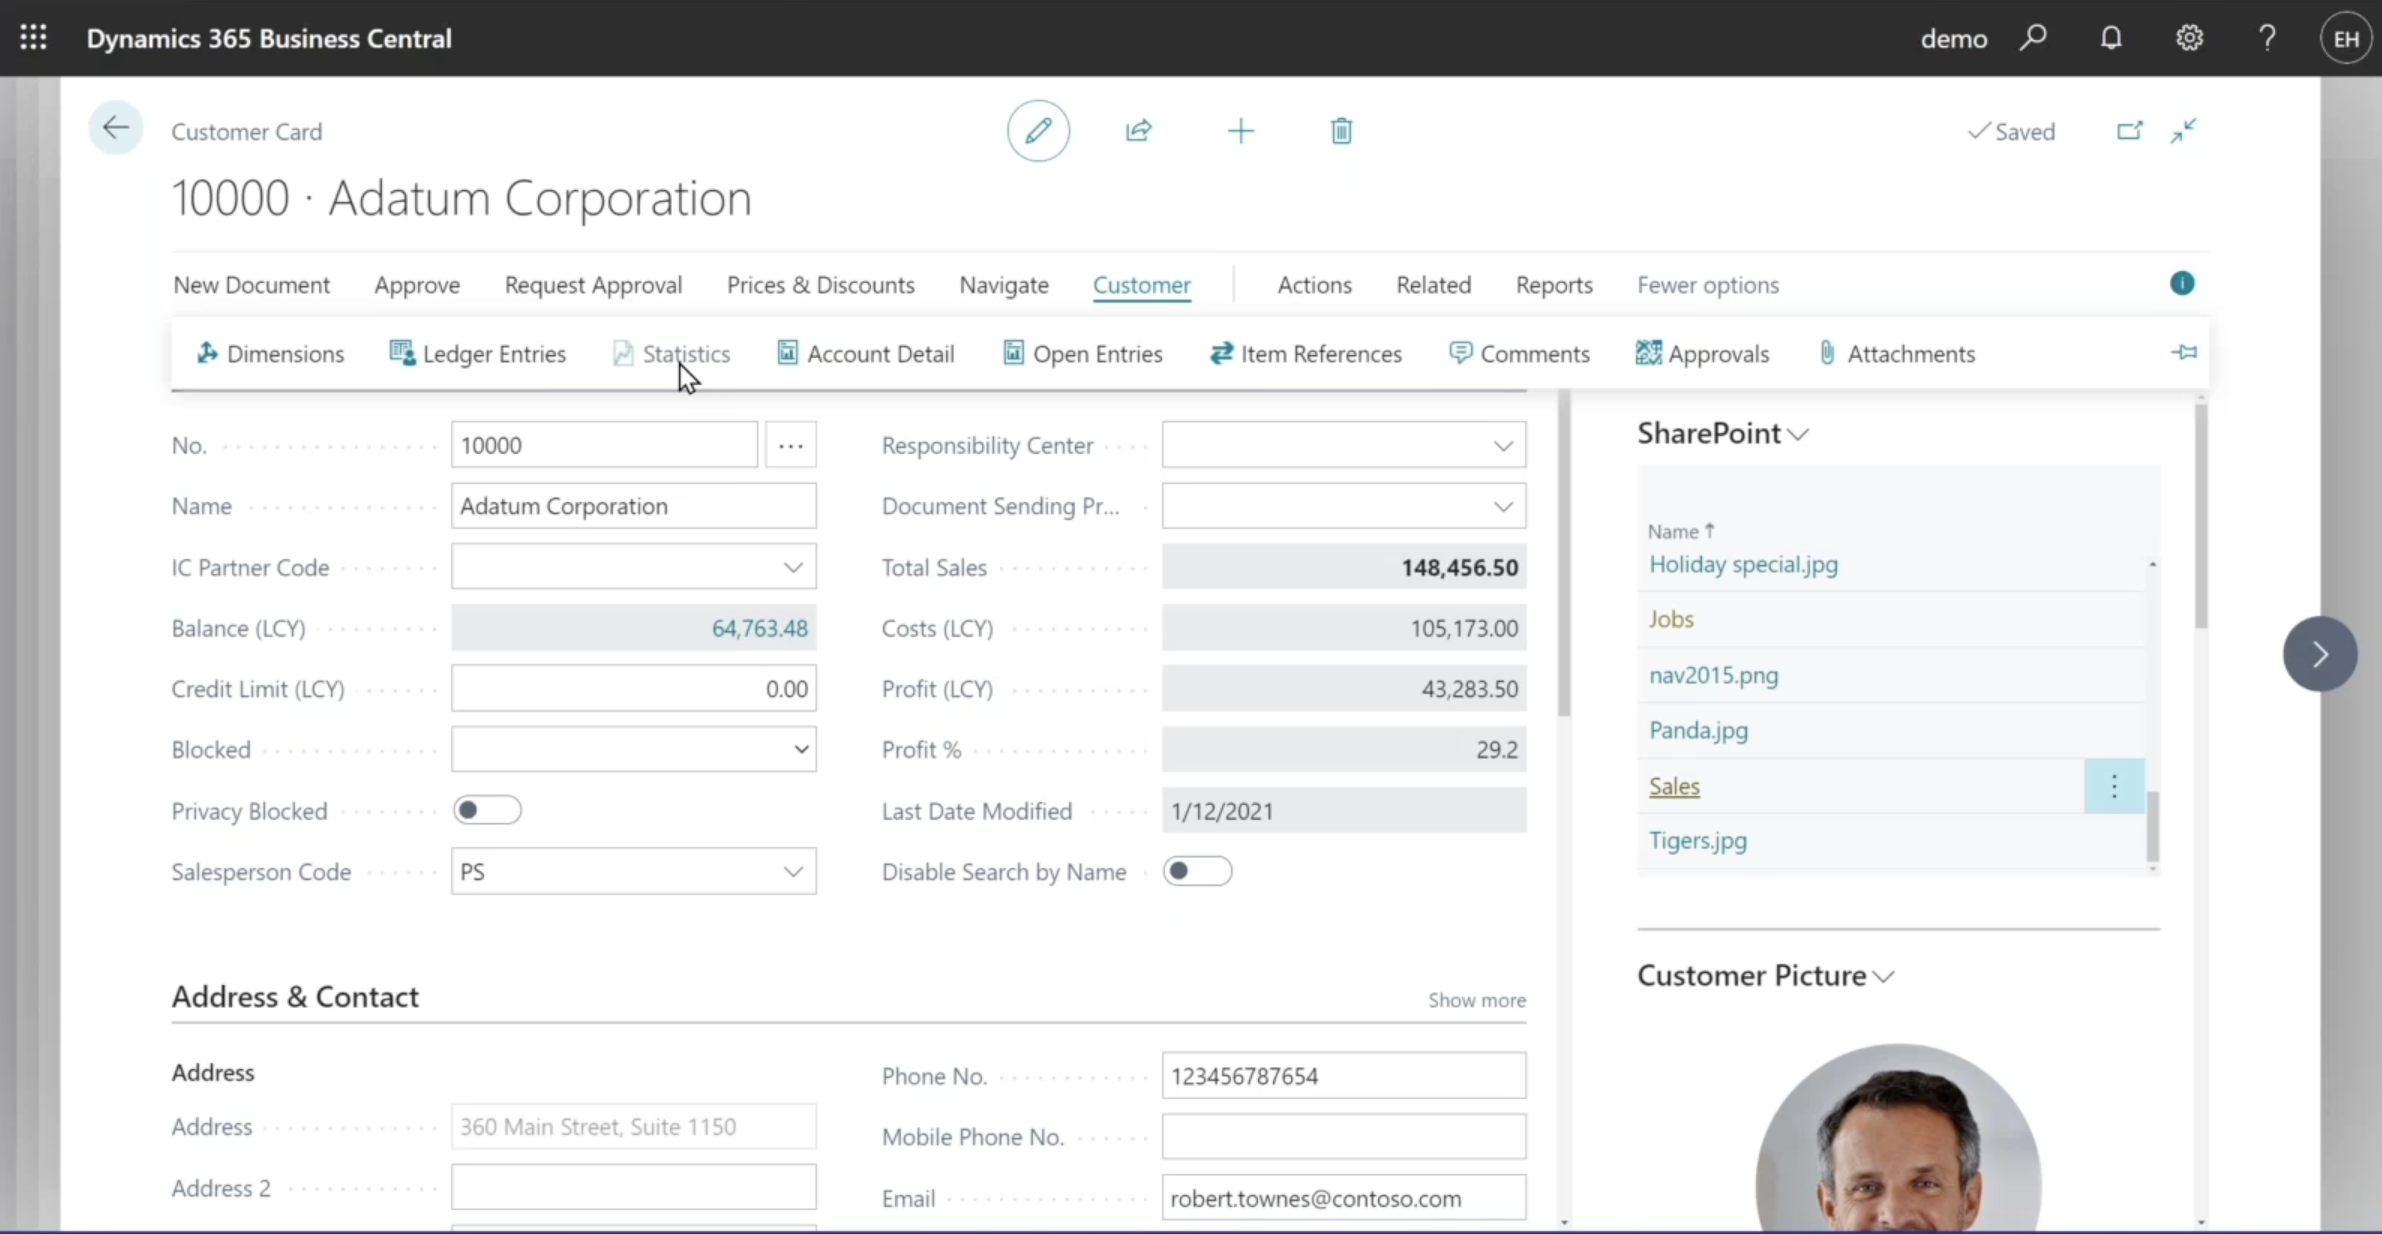 customer card overview in Dynamics 365 Business Central